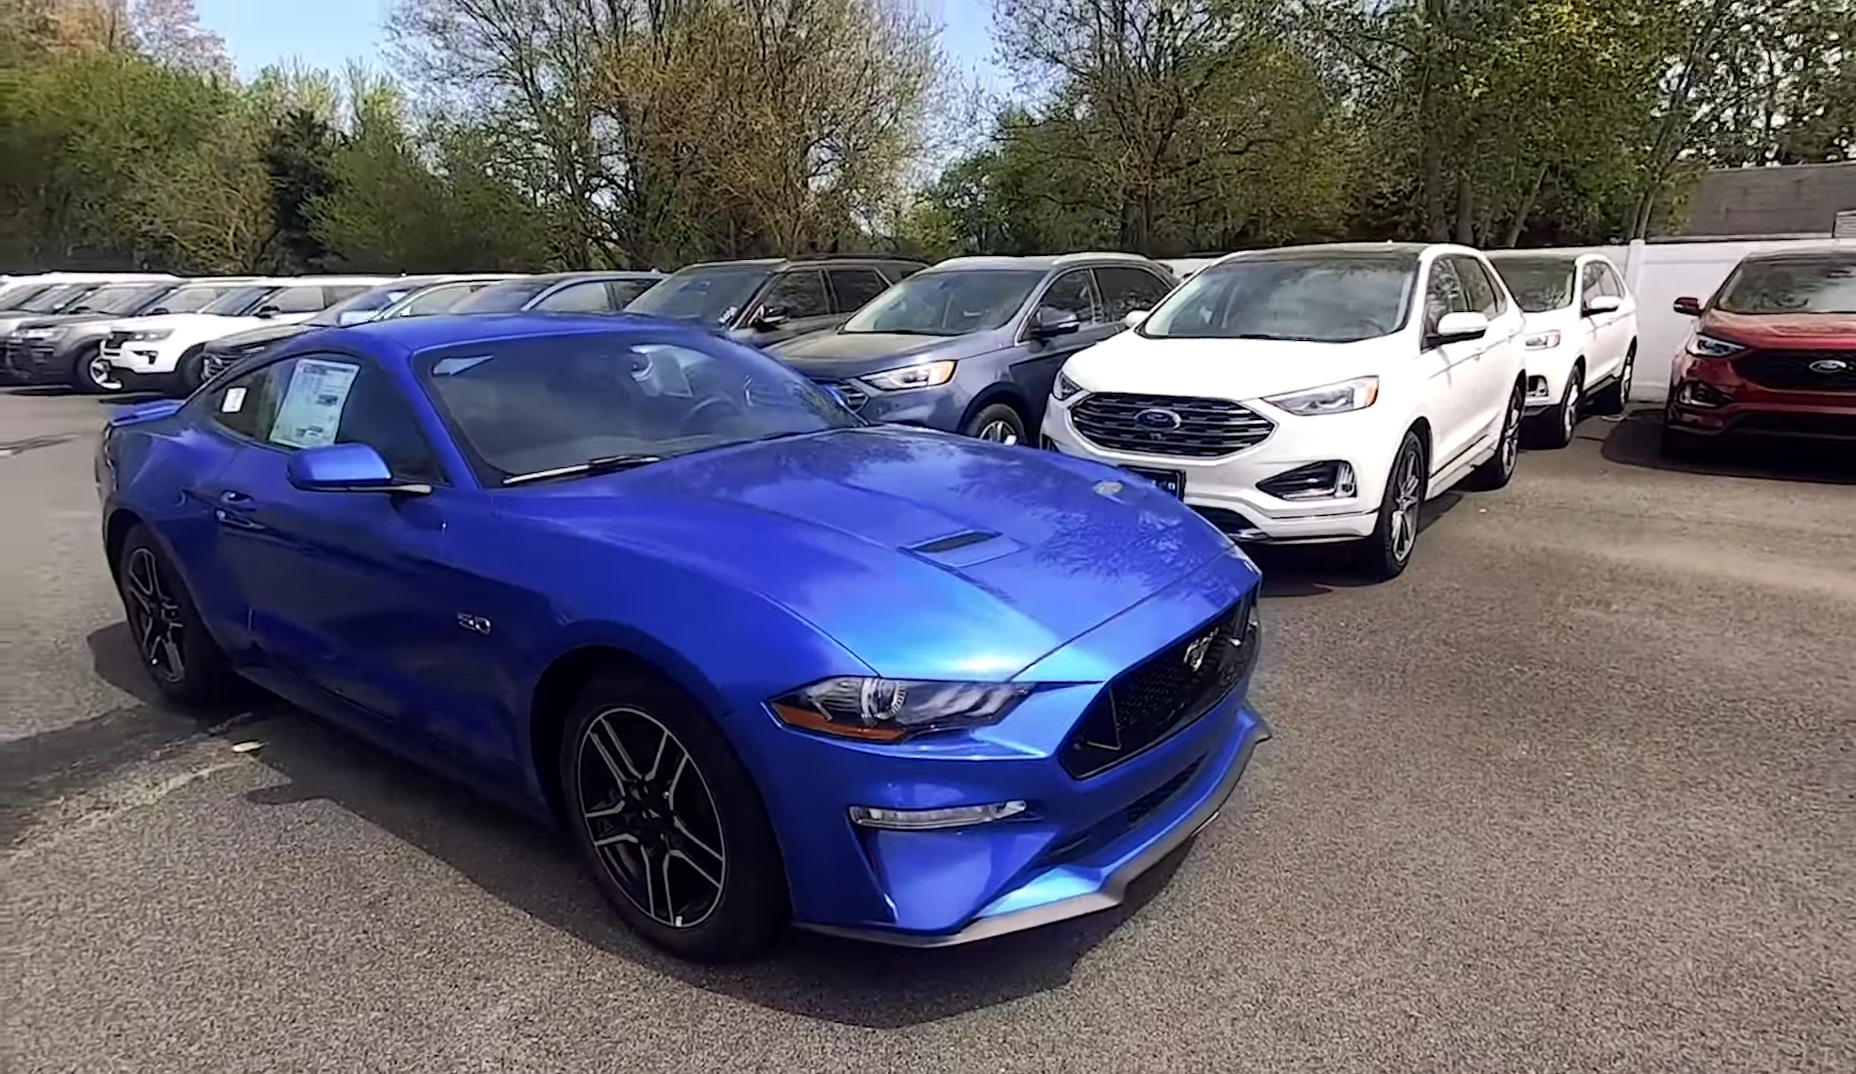 Video: 2019 Ford Mustang GT - Test Drive